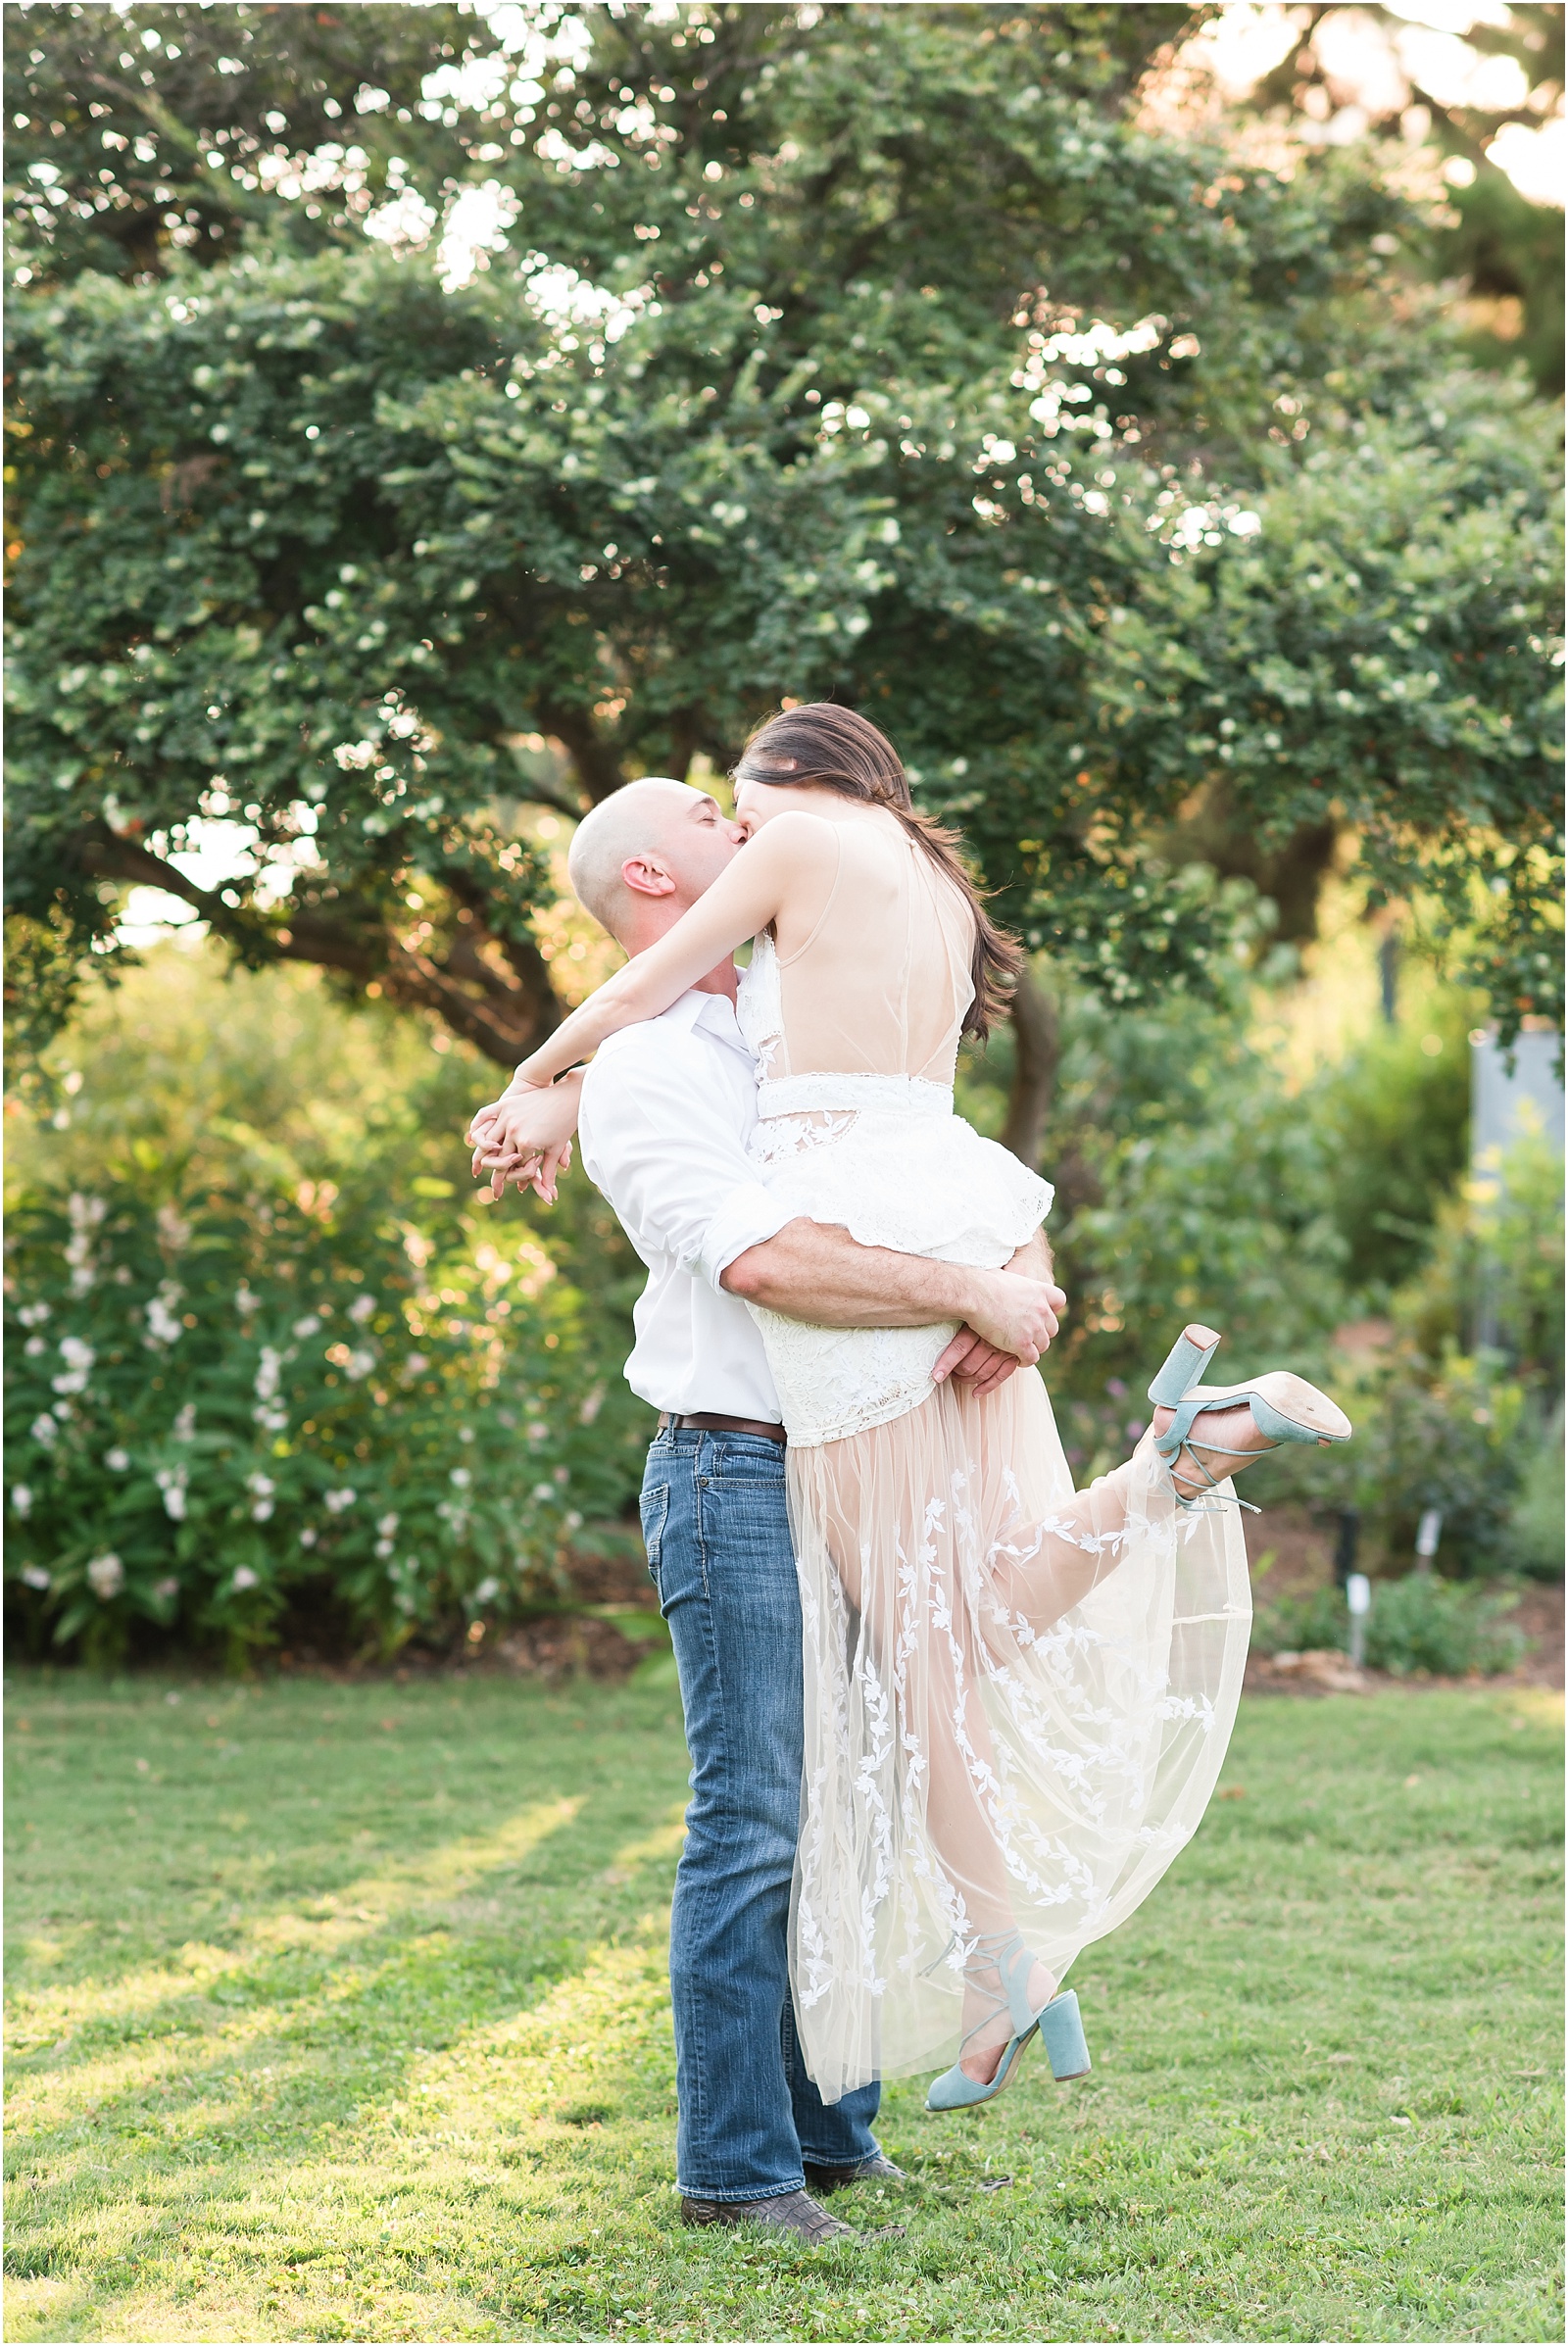 a man wearing a white shirt with dark blue jeans lifting up and kissing a woman wearing a white dress with dusty blue heels at JC Raulston Arboretum